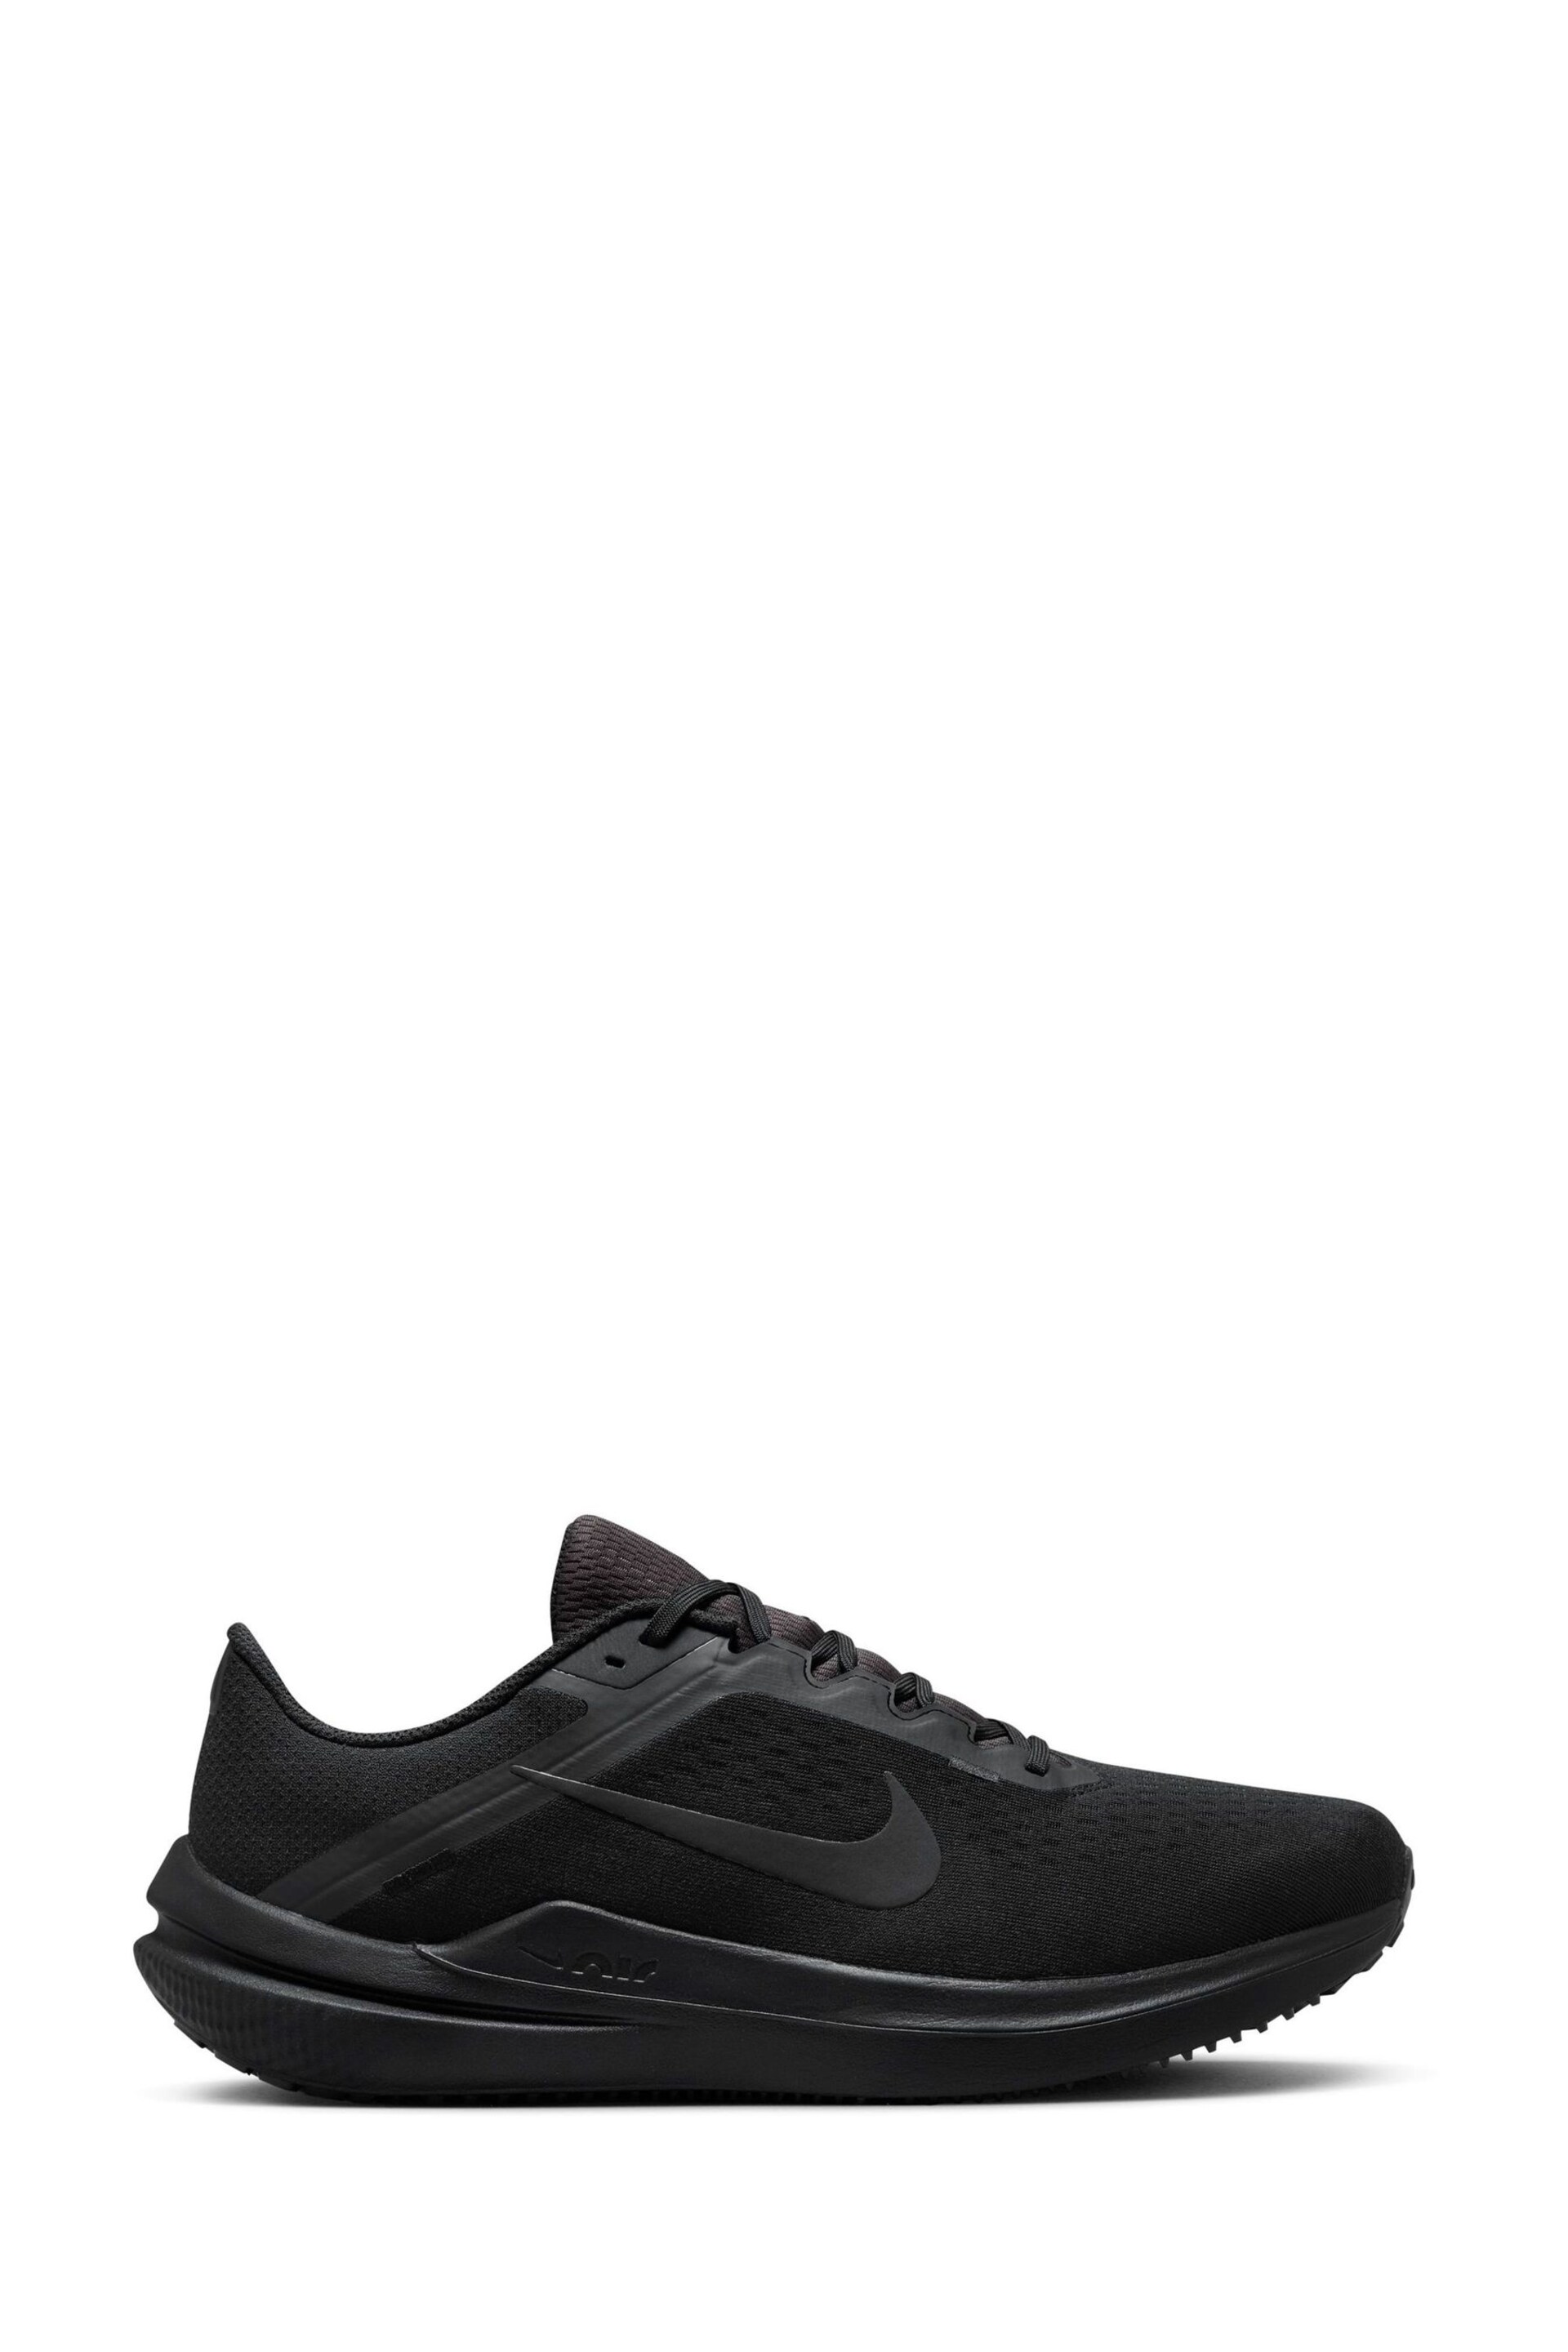 Nike Black Air Winflo 10 Running Trainers - Image 1 of 11